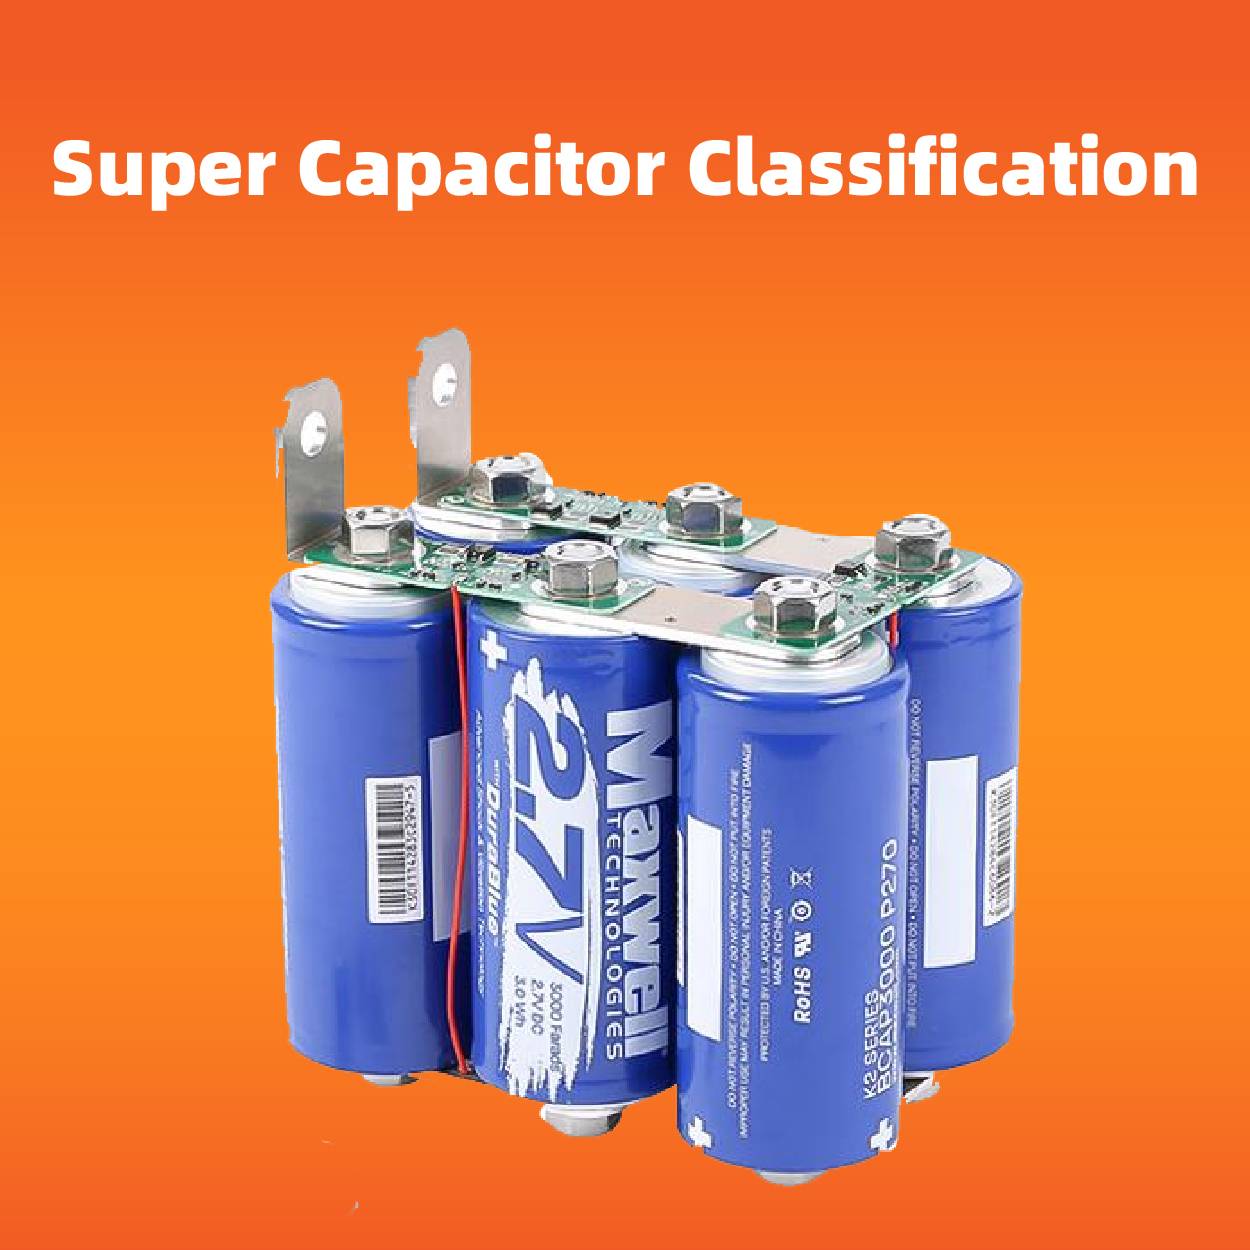 Super Capacitor Highlights Features